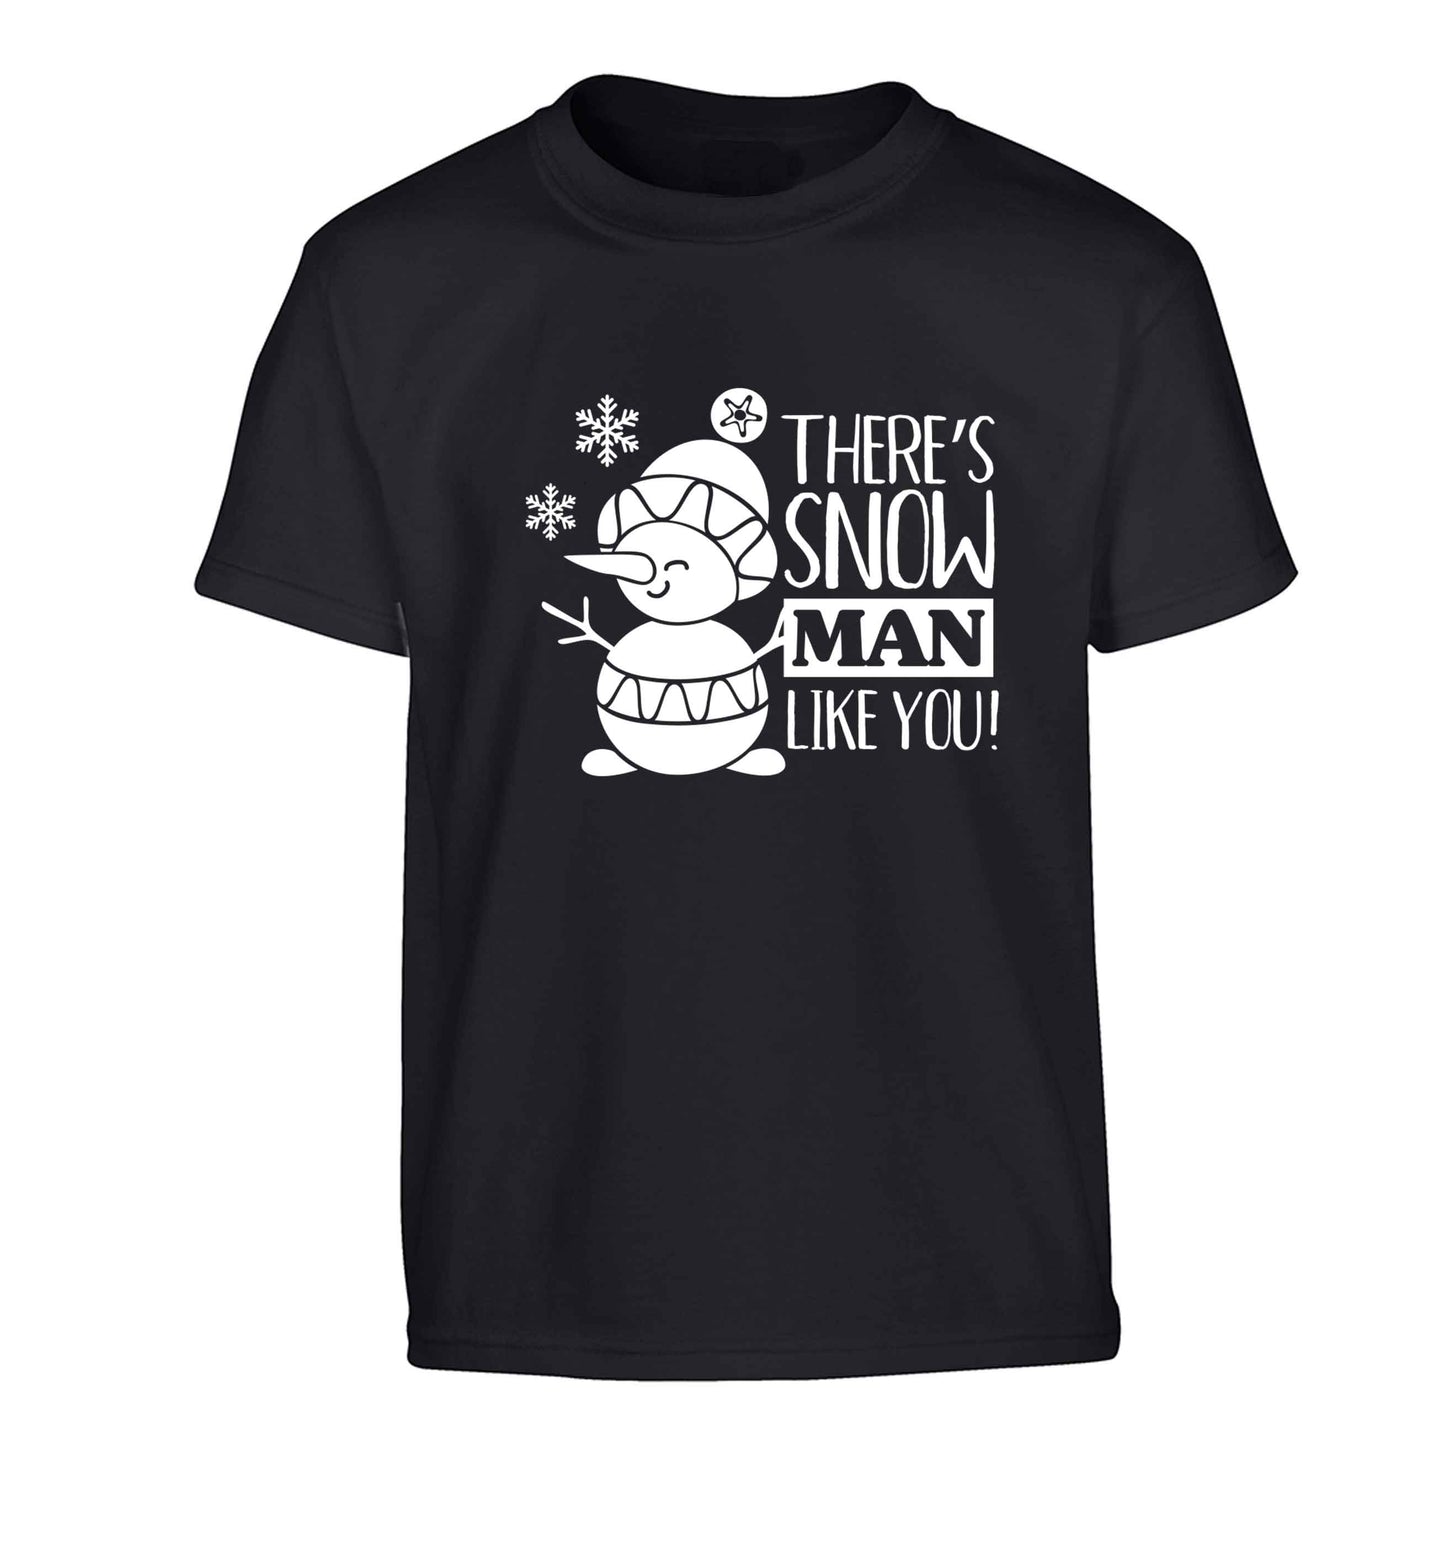 There's snow man like you Children's black Tshirt 12-13 Years